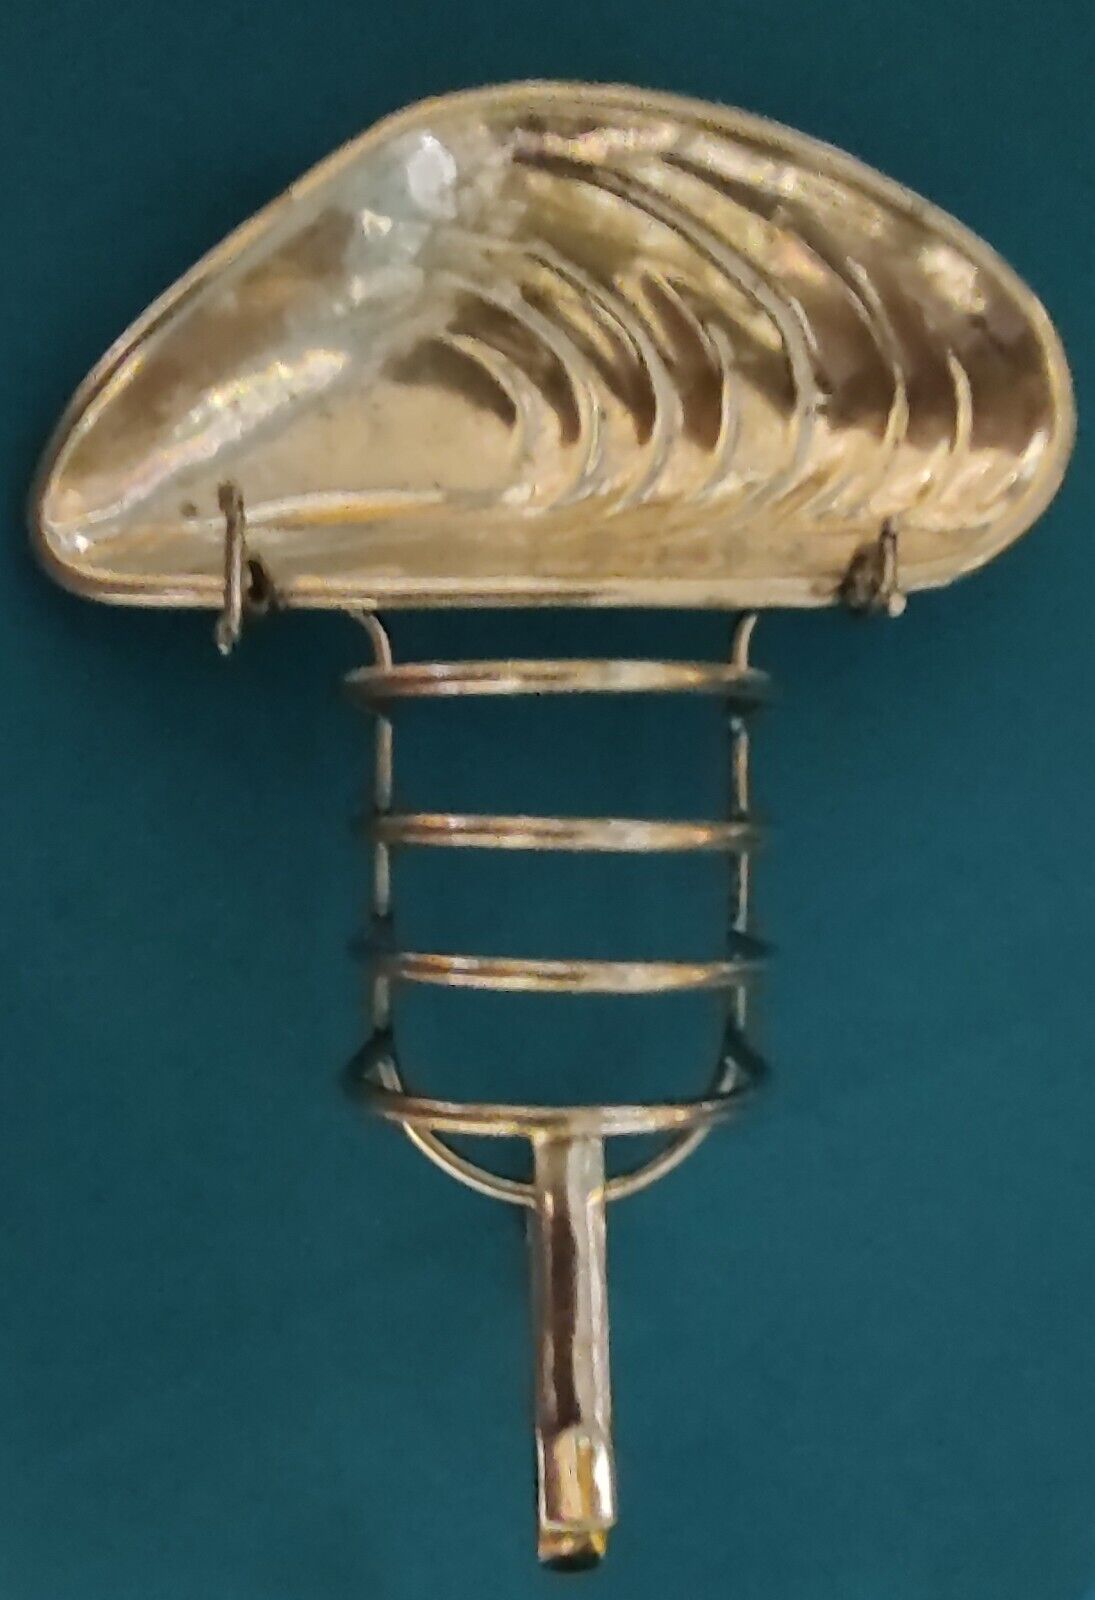 Very Unique Vintage Toast Rack with Mussel Shell Marmalade Dish & Spoon Cradle